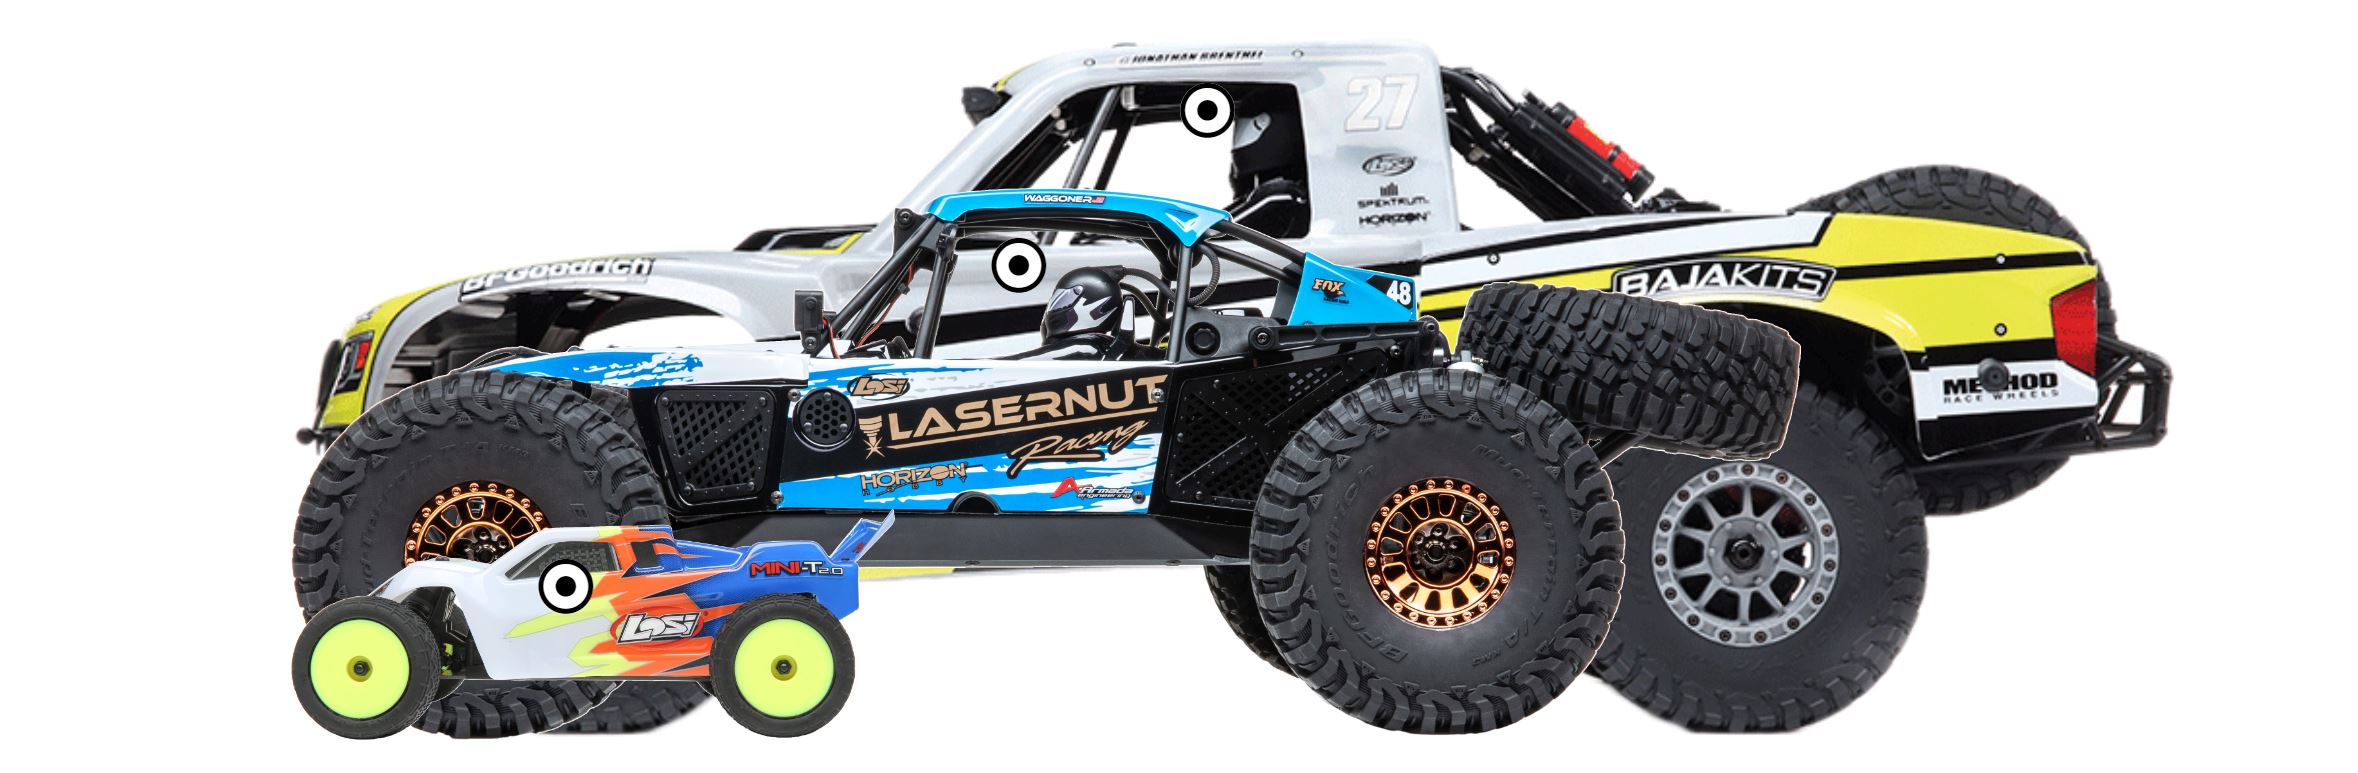 Shop Losi Car and Truck by Size